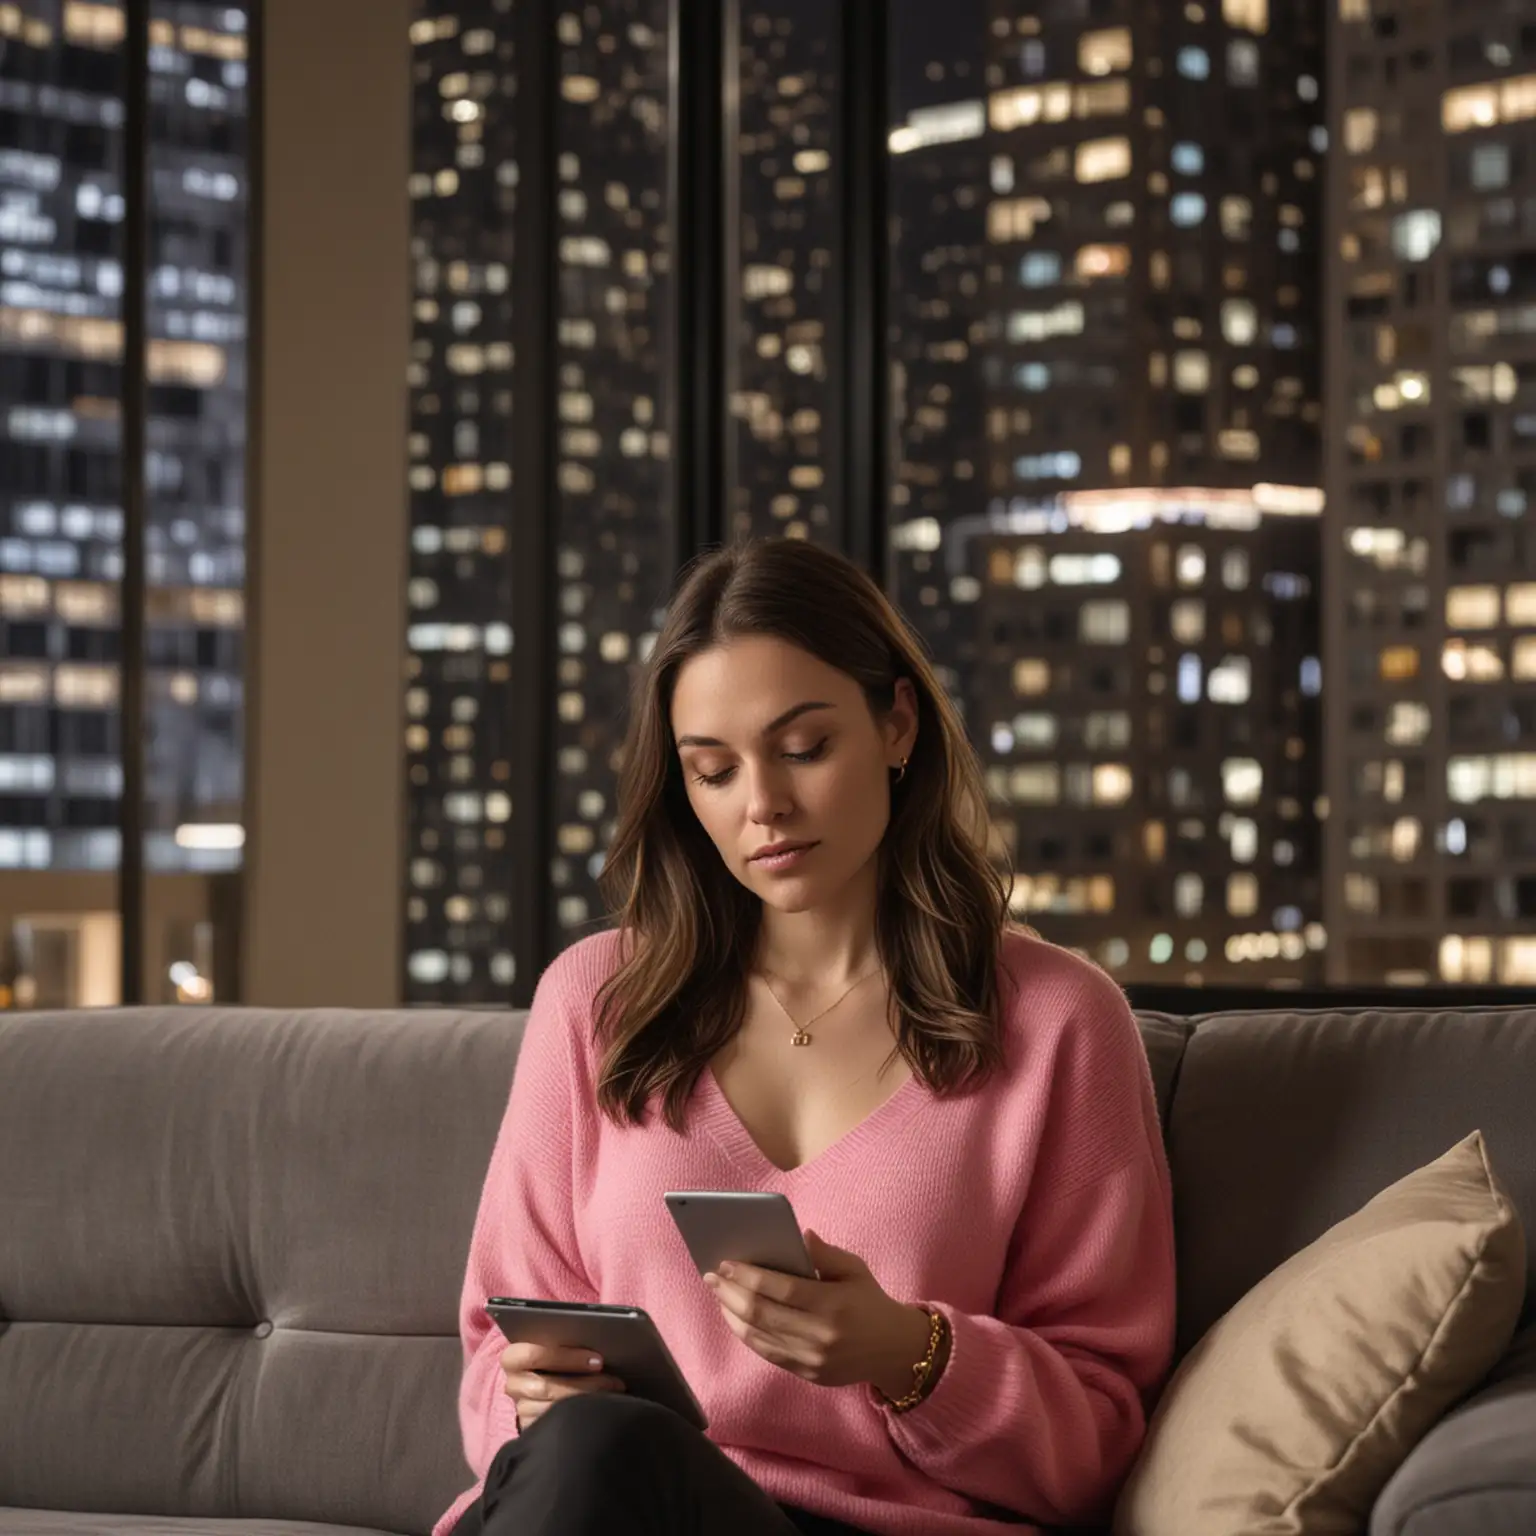 Dark modern apartment at night, 30 year old pale white woman, long dark brown hair parted to the right, pink sweater and a gold necklace, reading an unbranded tablet on gray couch, face illuminated by tabler, urban high rise background